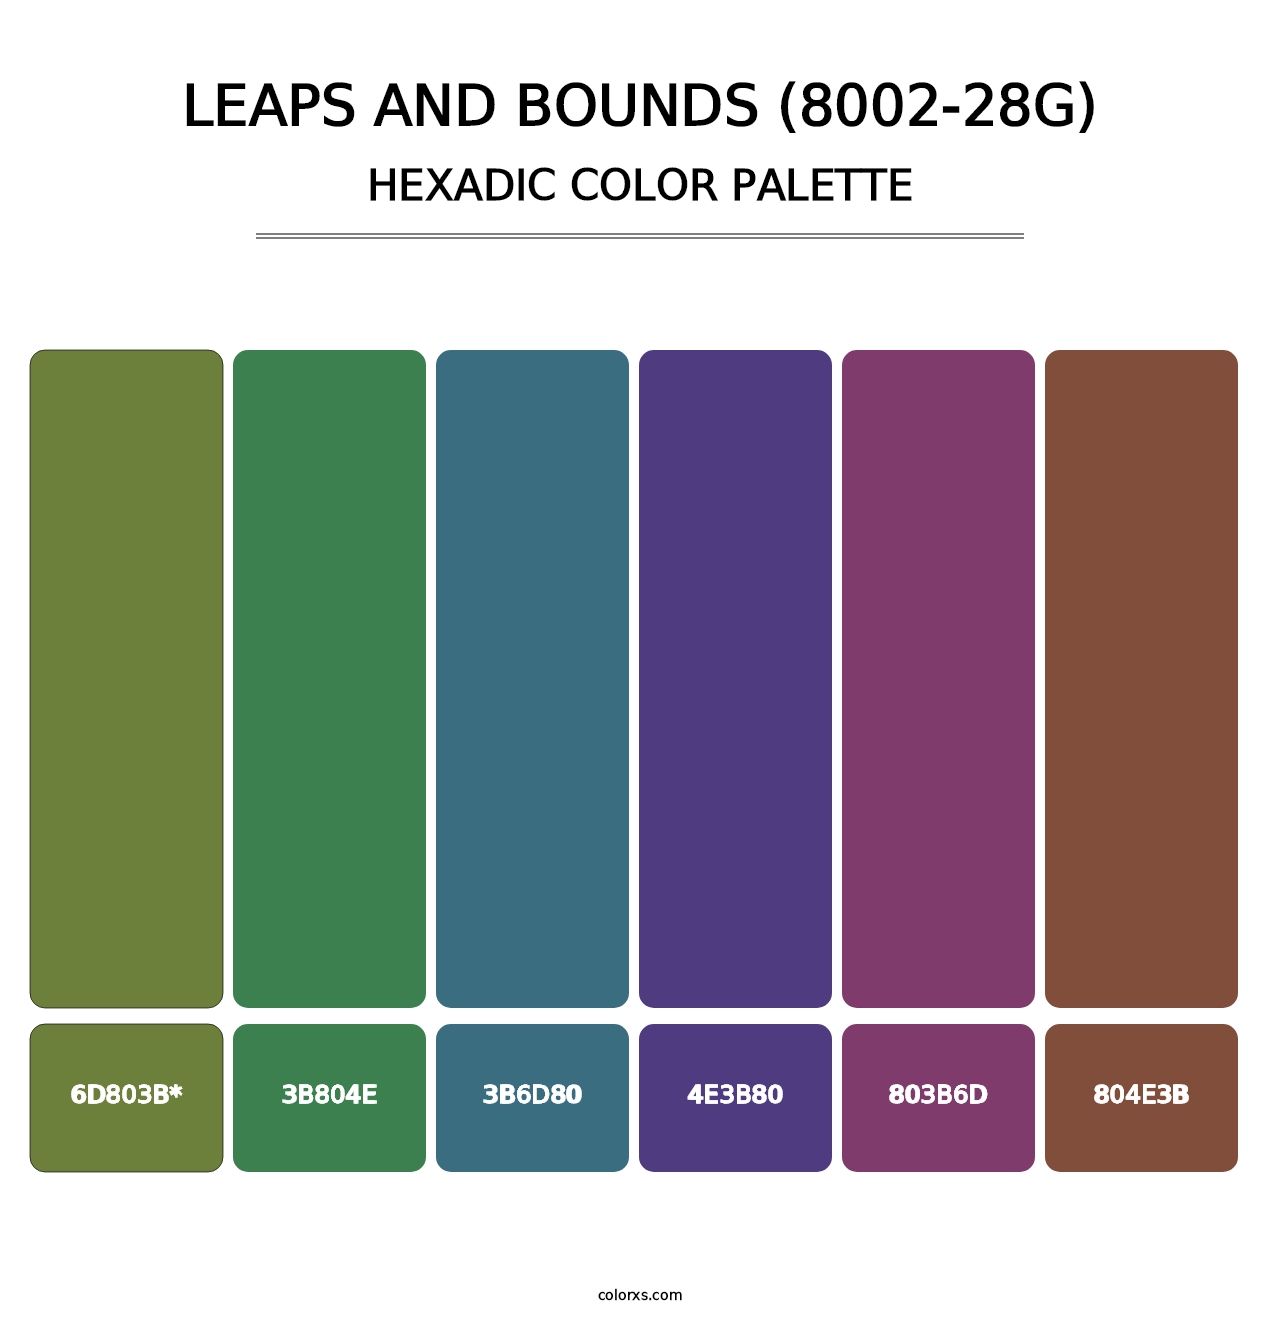 Leaps and Bounds (8002-28G) - Hexadic Color Palette